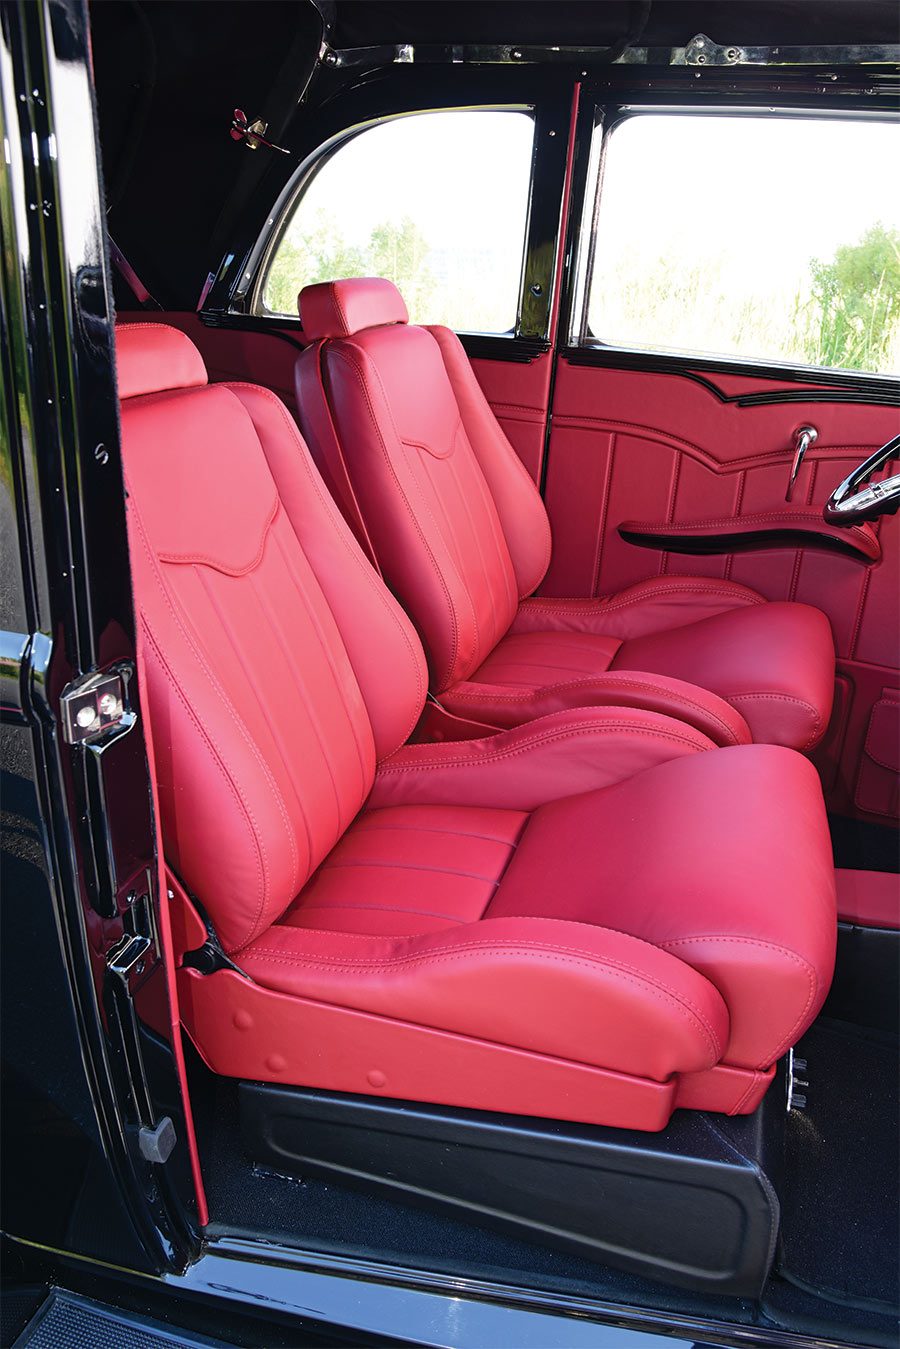 1932 Ford B-400 red seats interior view